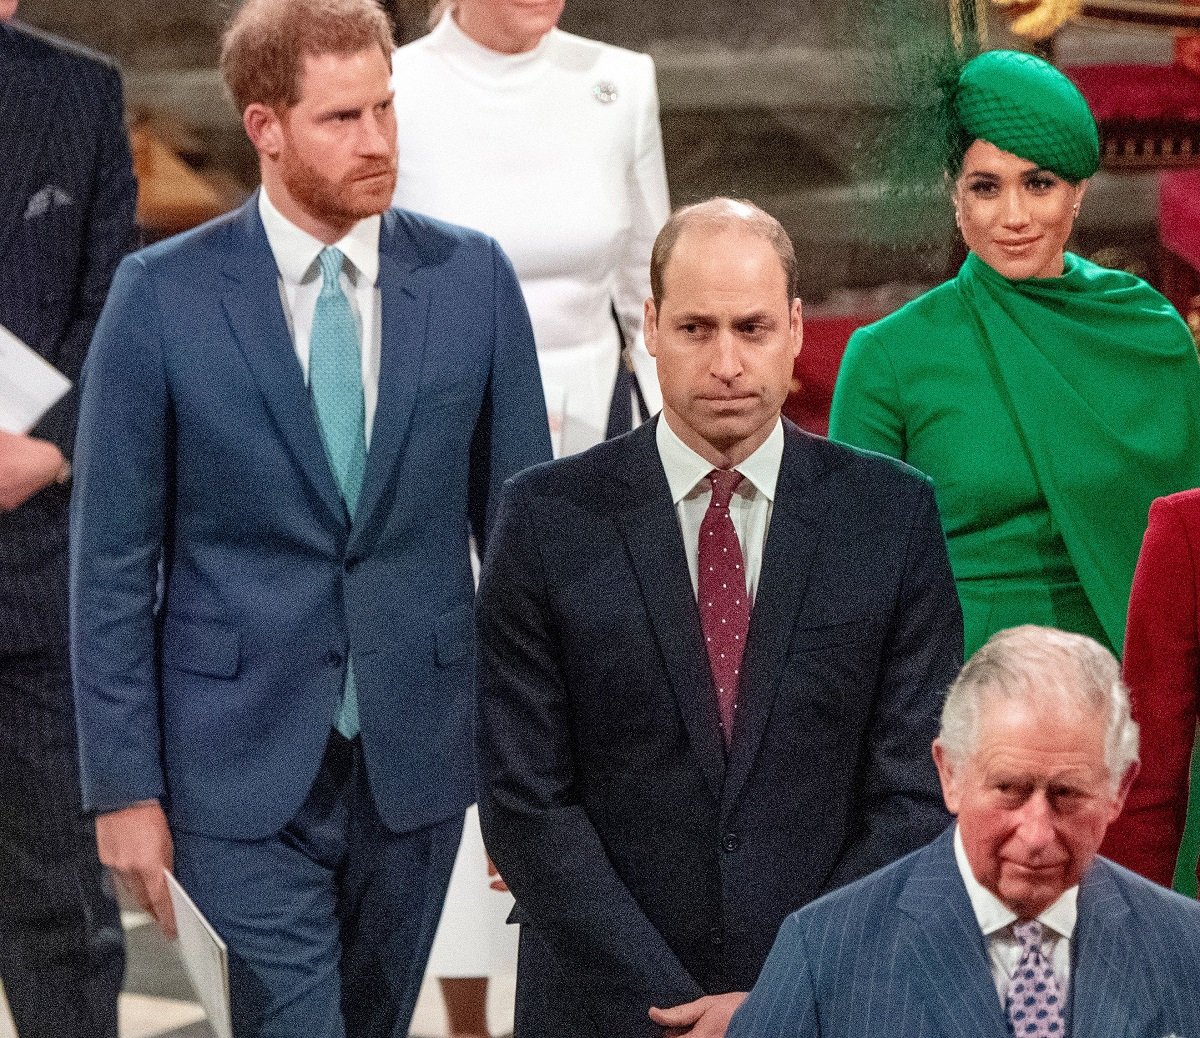 Members of the royal family at Westminster Abbey the day of Prince Harry and Meghan Markle's last royal engagement months after the Sandringham Summit